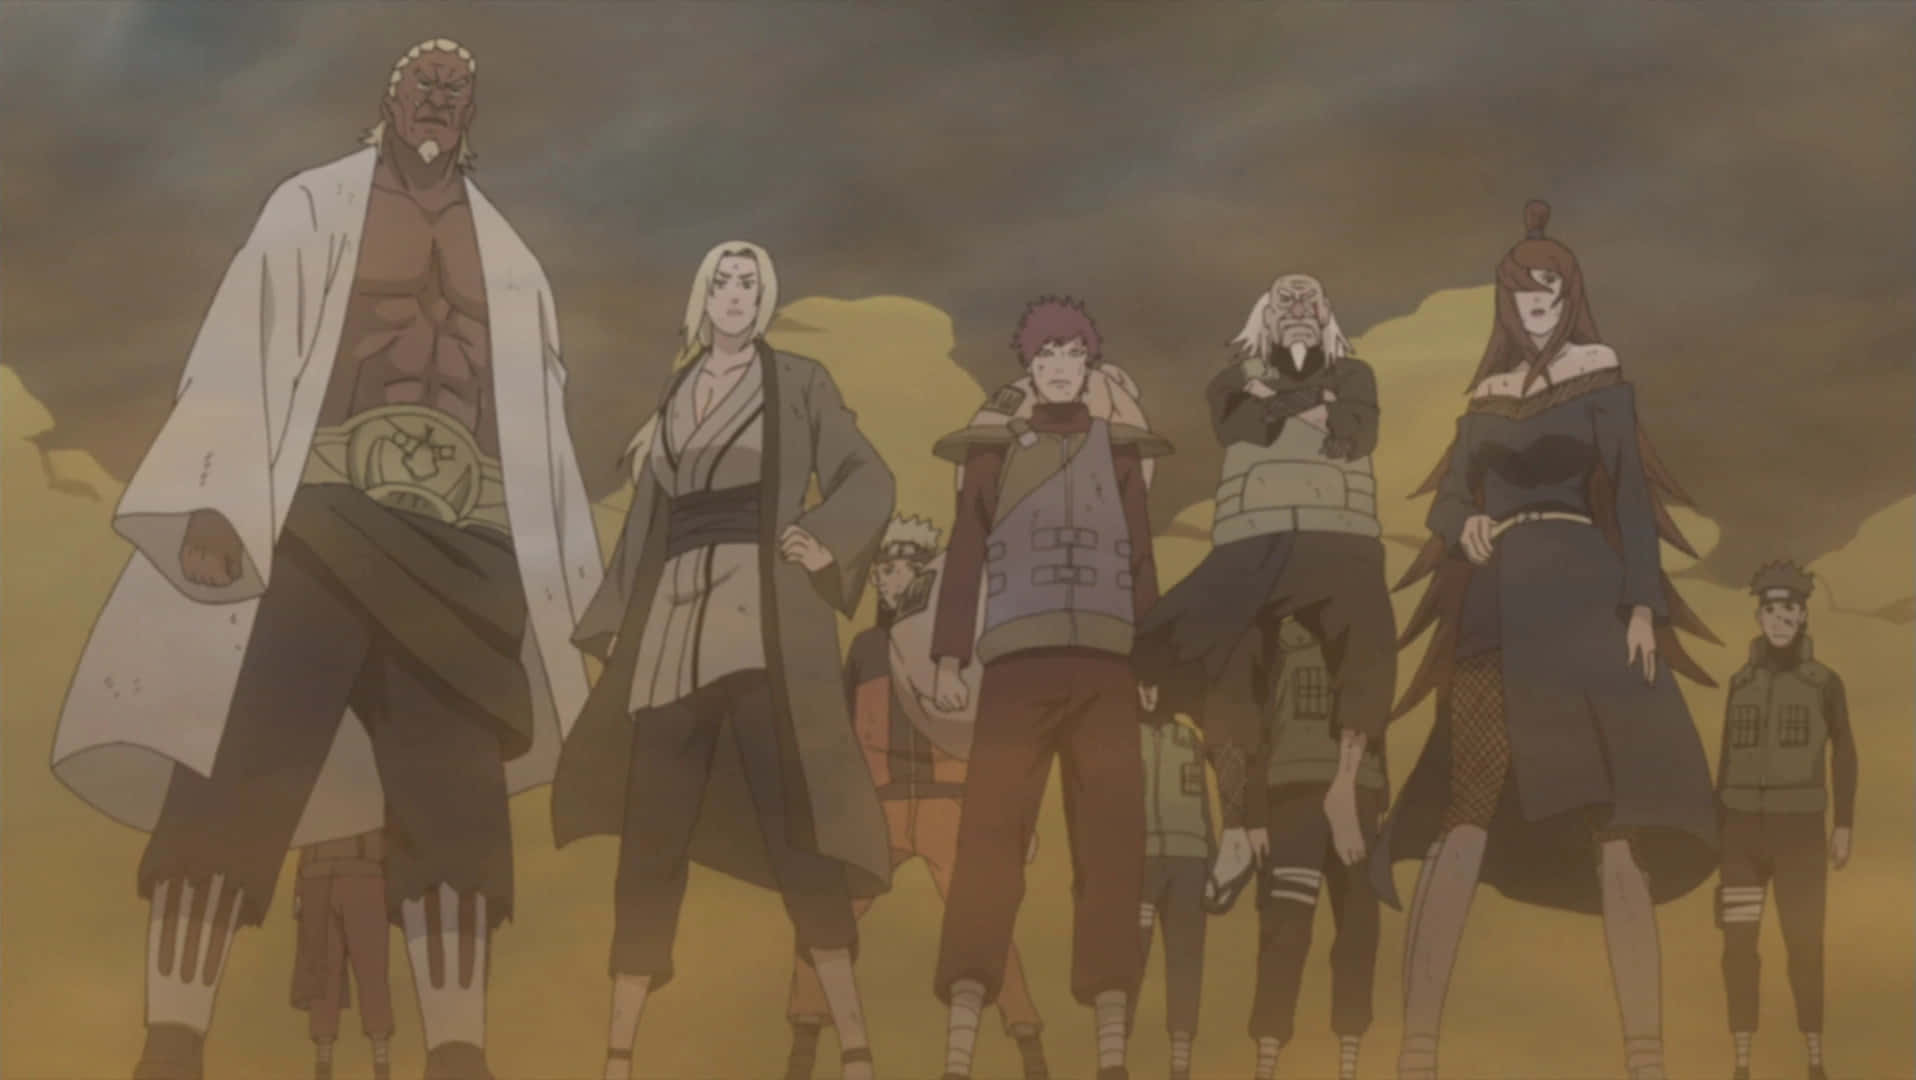 Caption: The Five Kage Summit in the world of Naruto Wallpaper